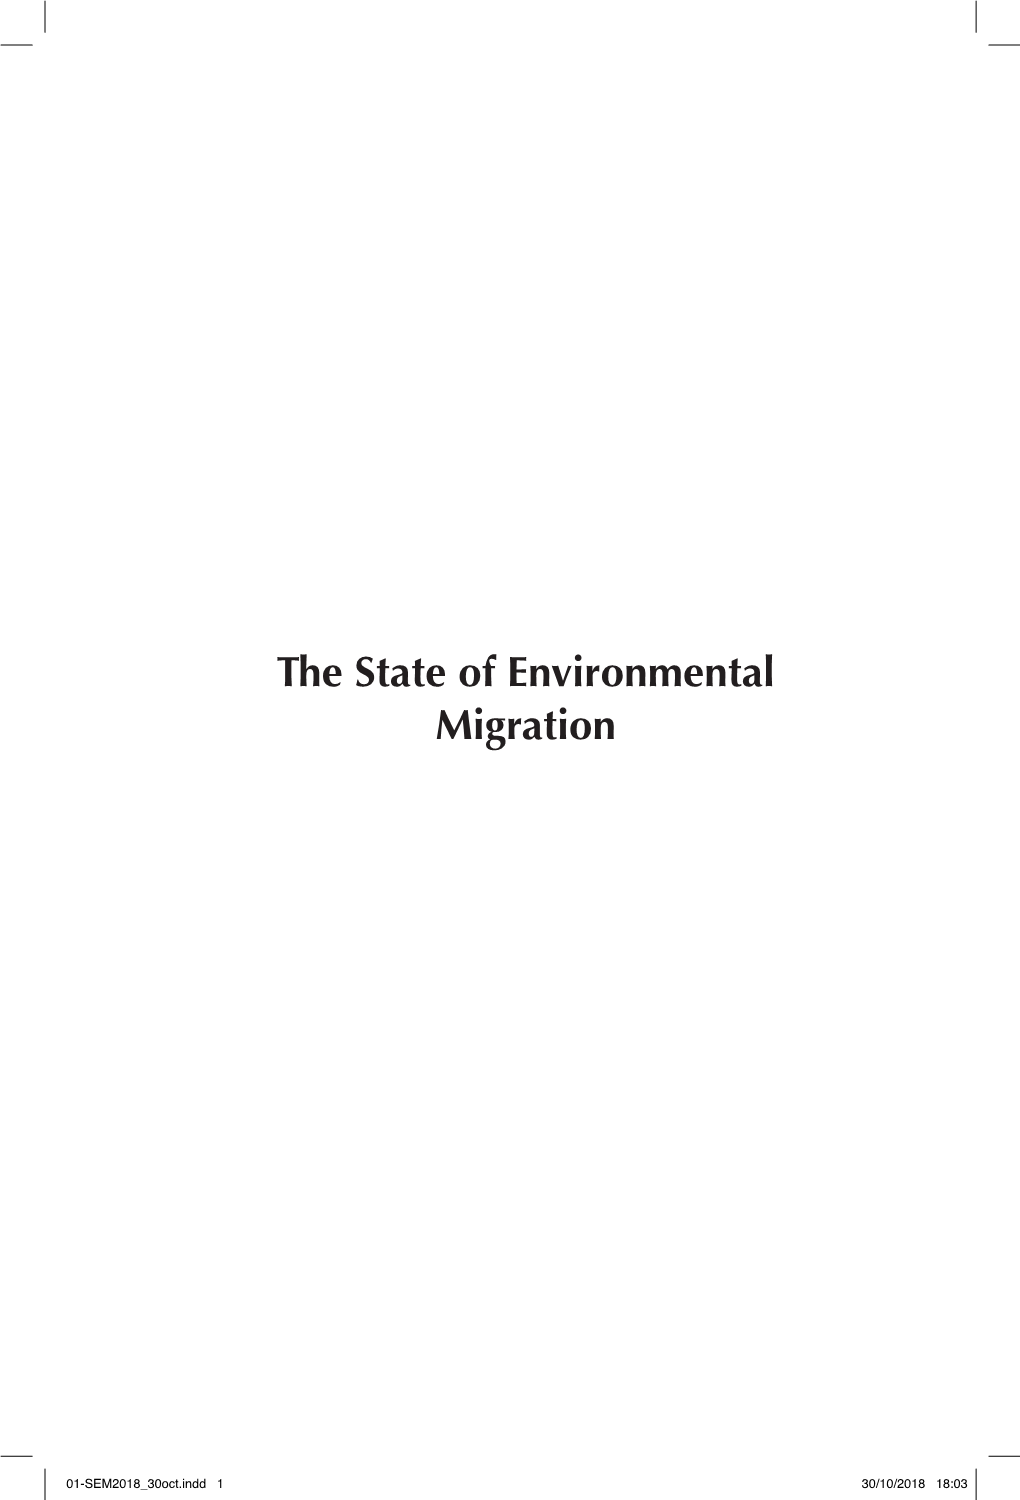 The State of Environmental Migration